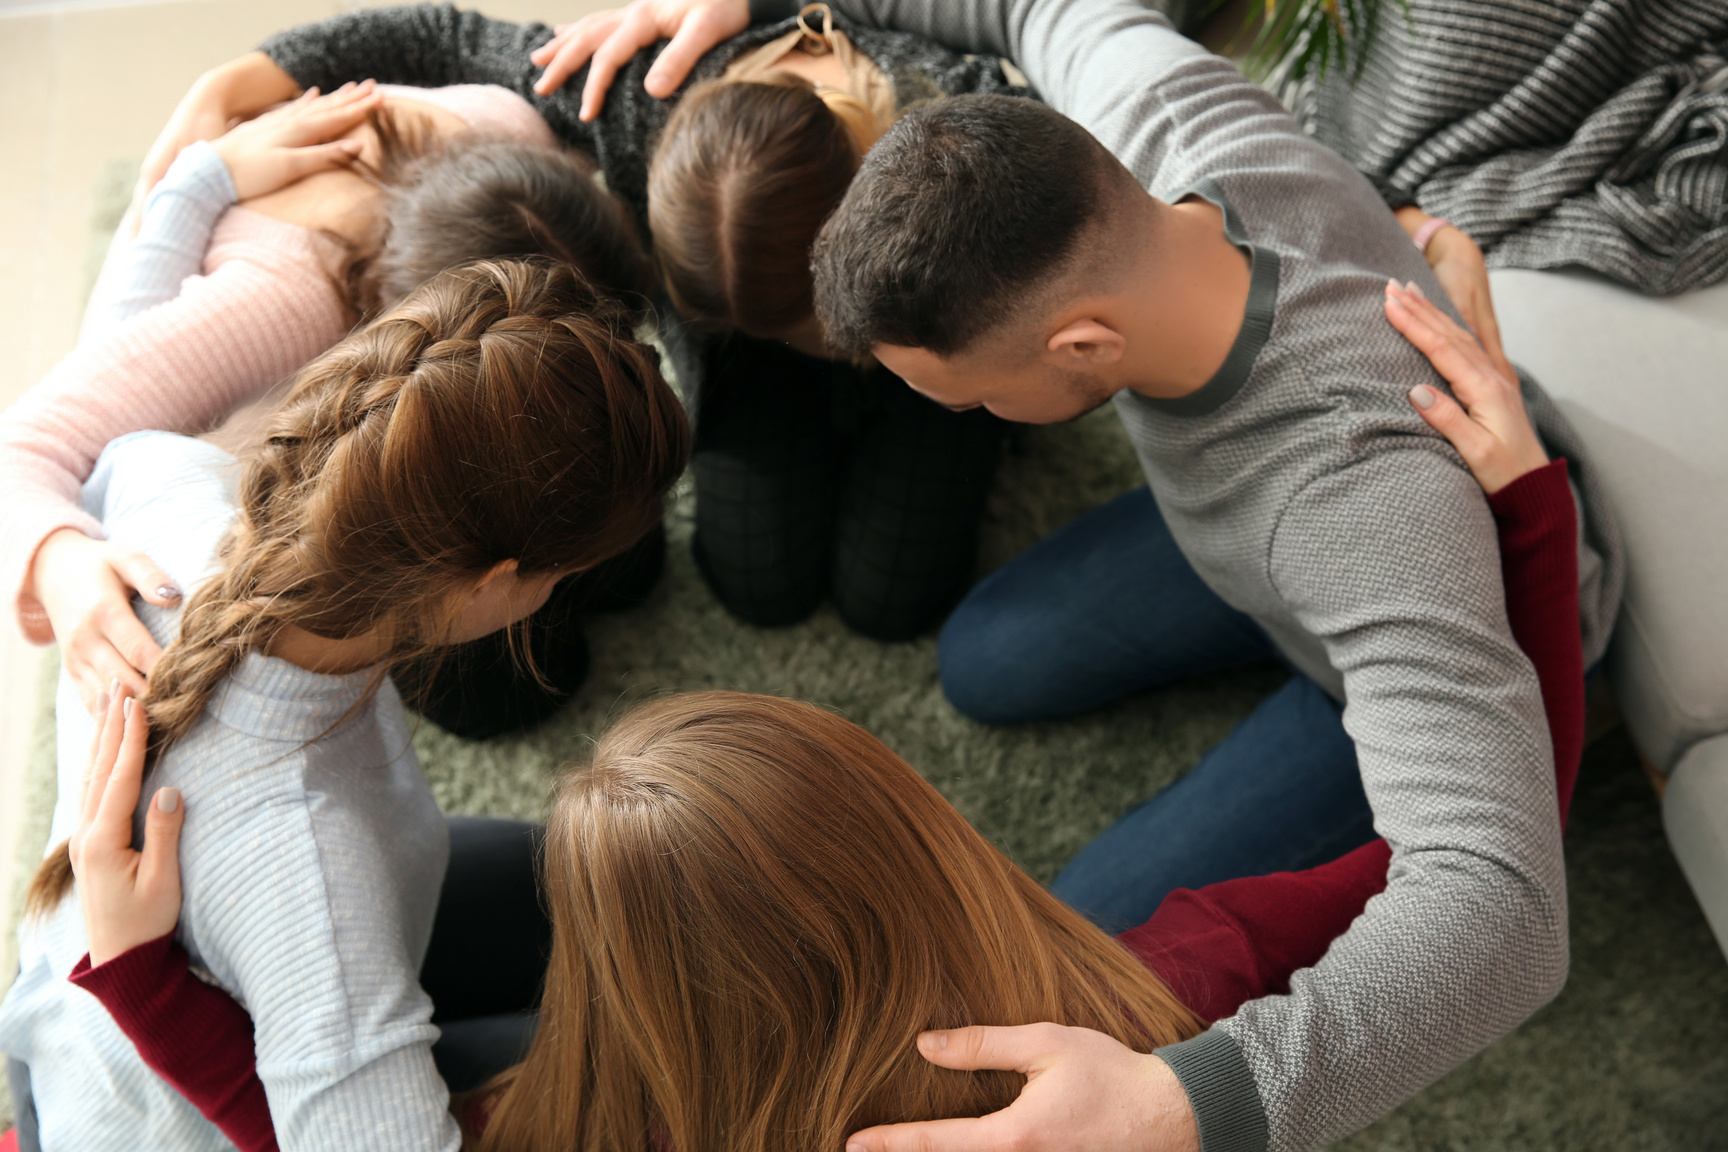 Group of People Praying Together Indoors